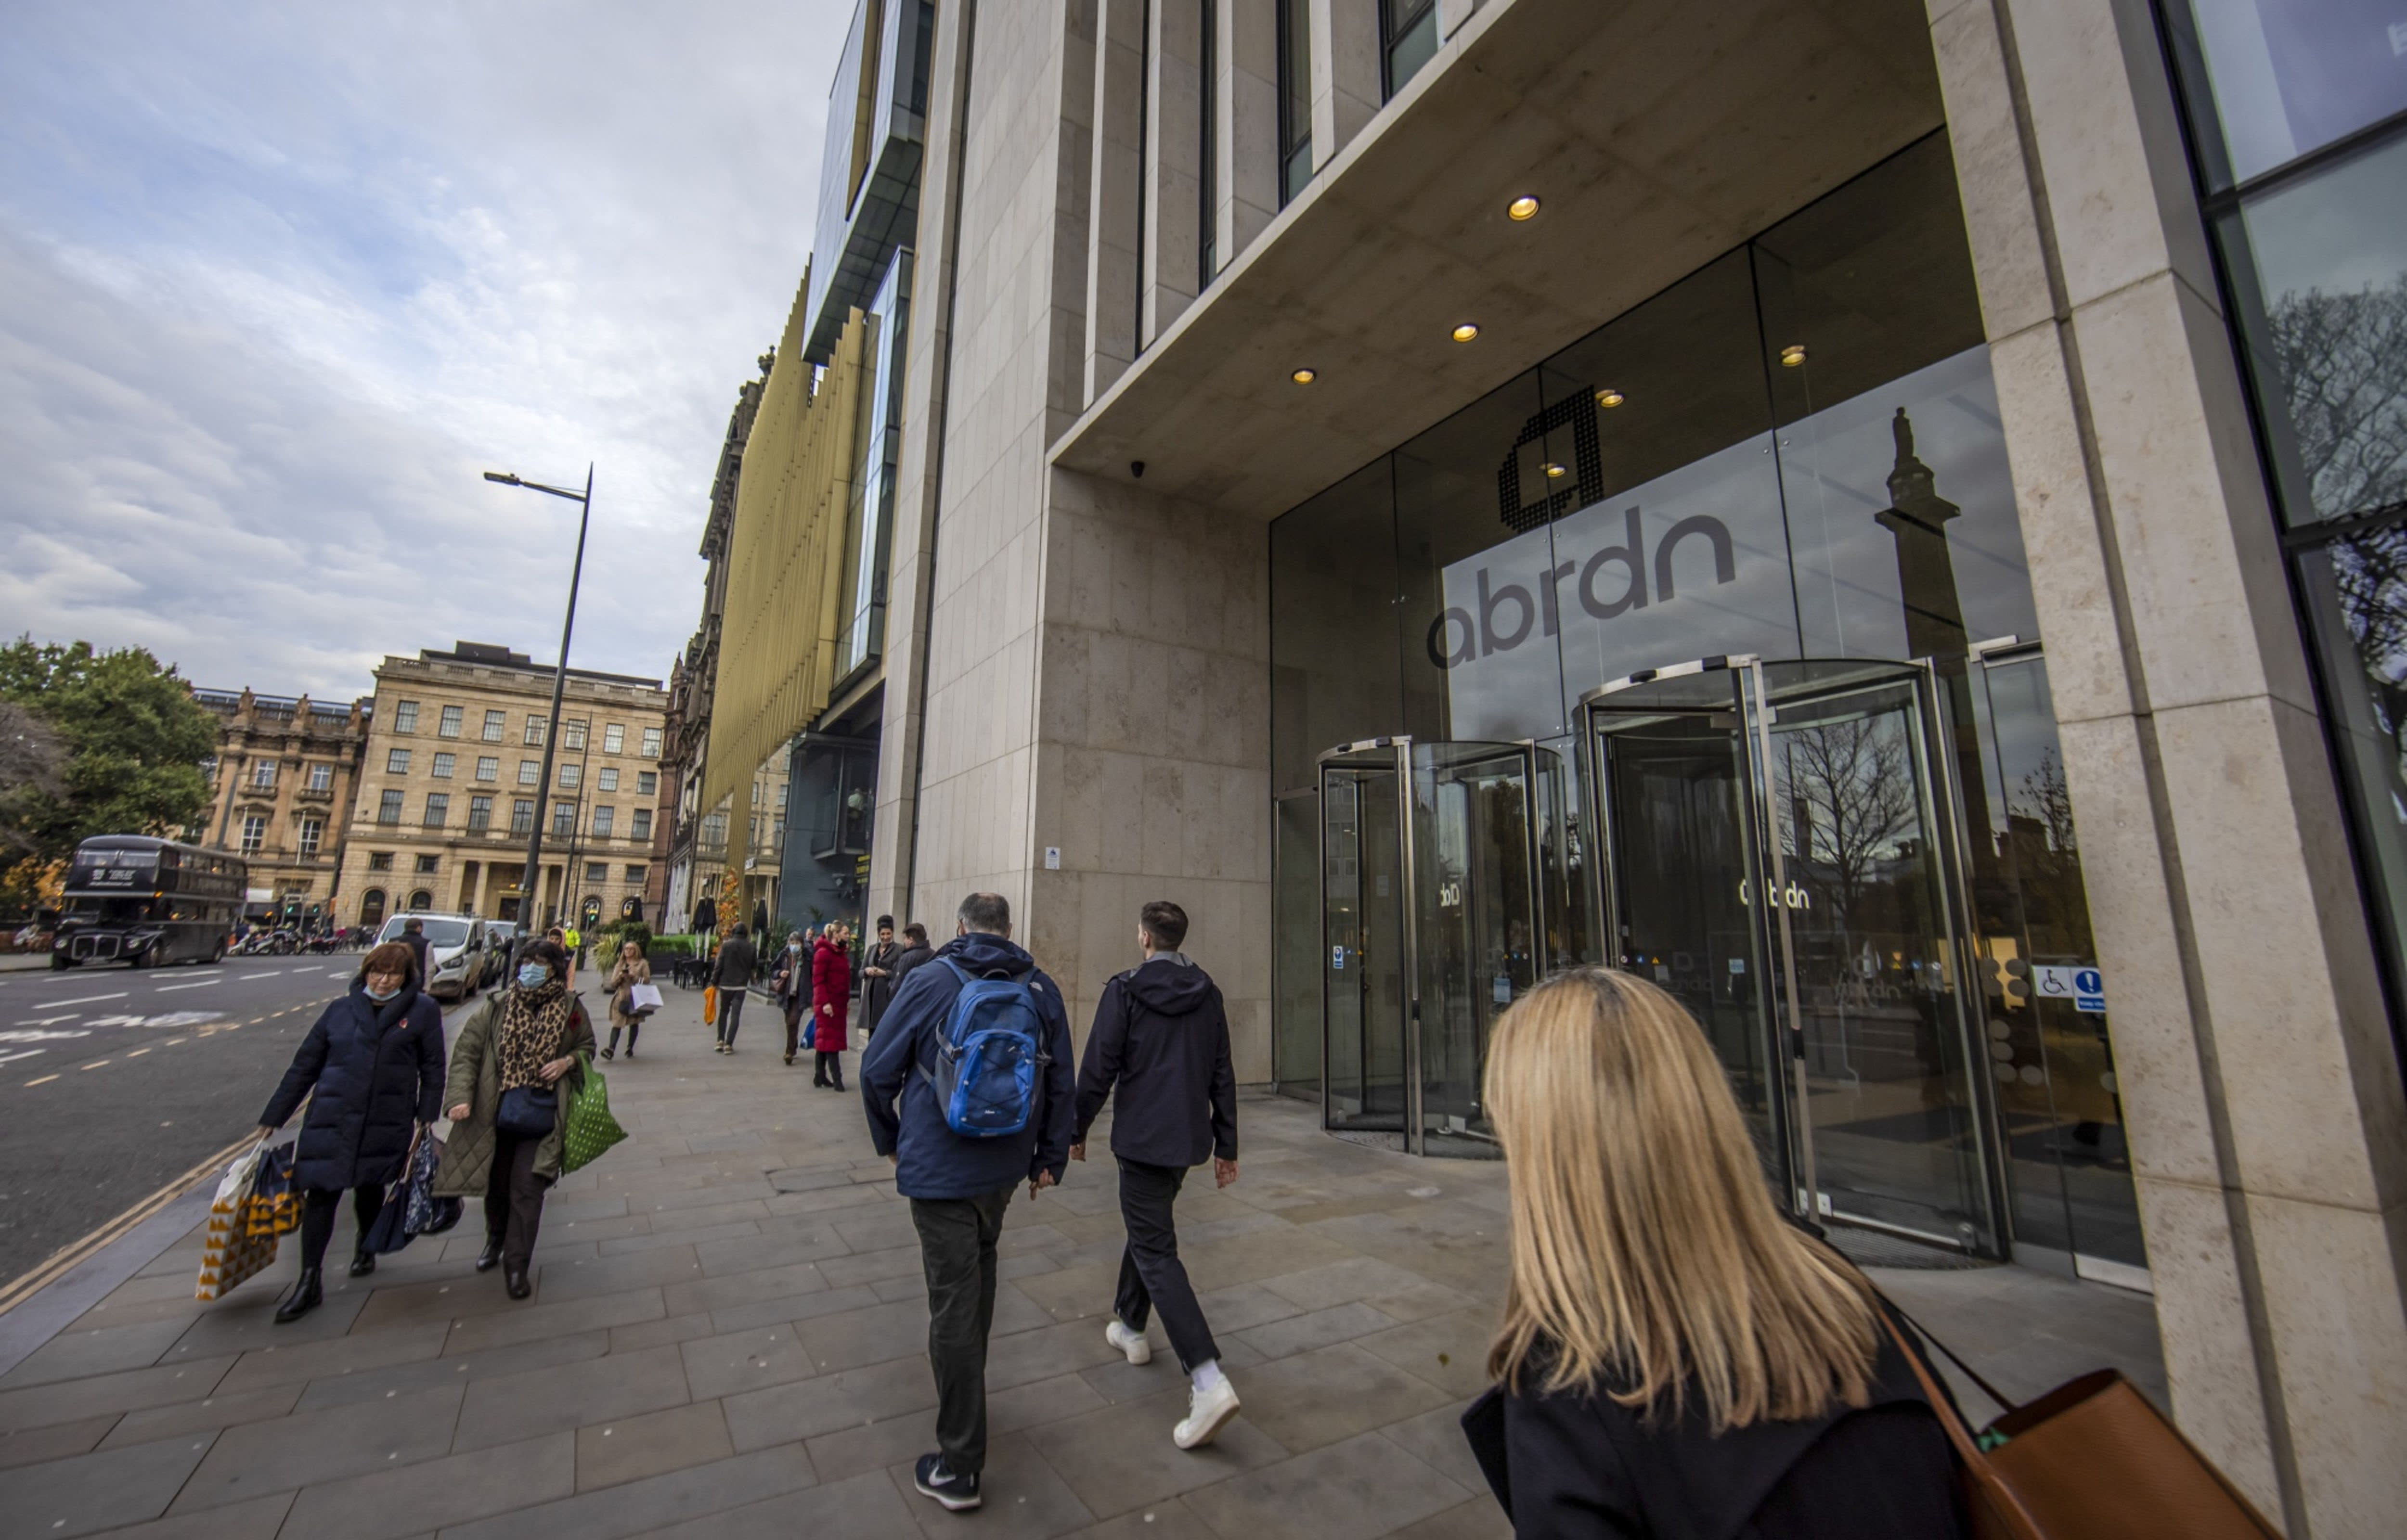 Abrdn and John Lewis announce build-to-rent partnership